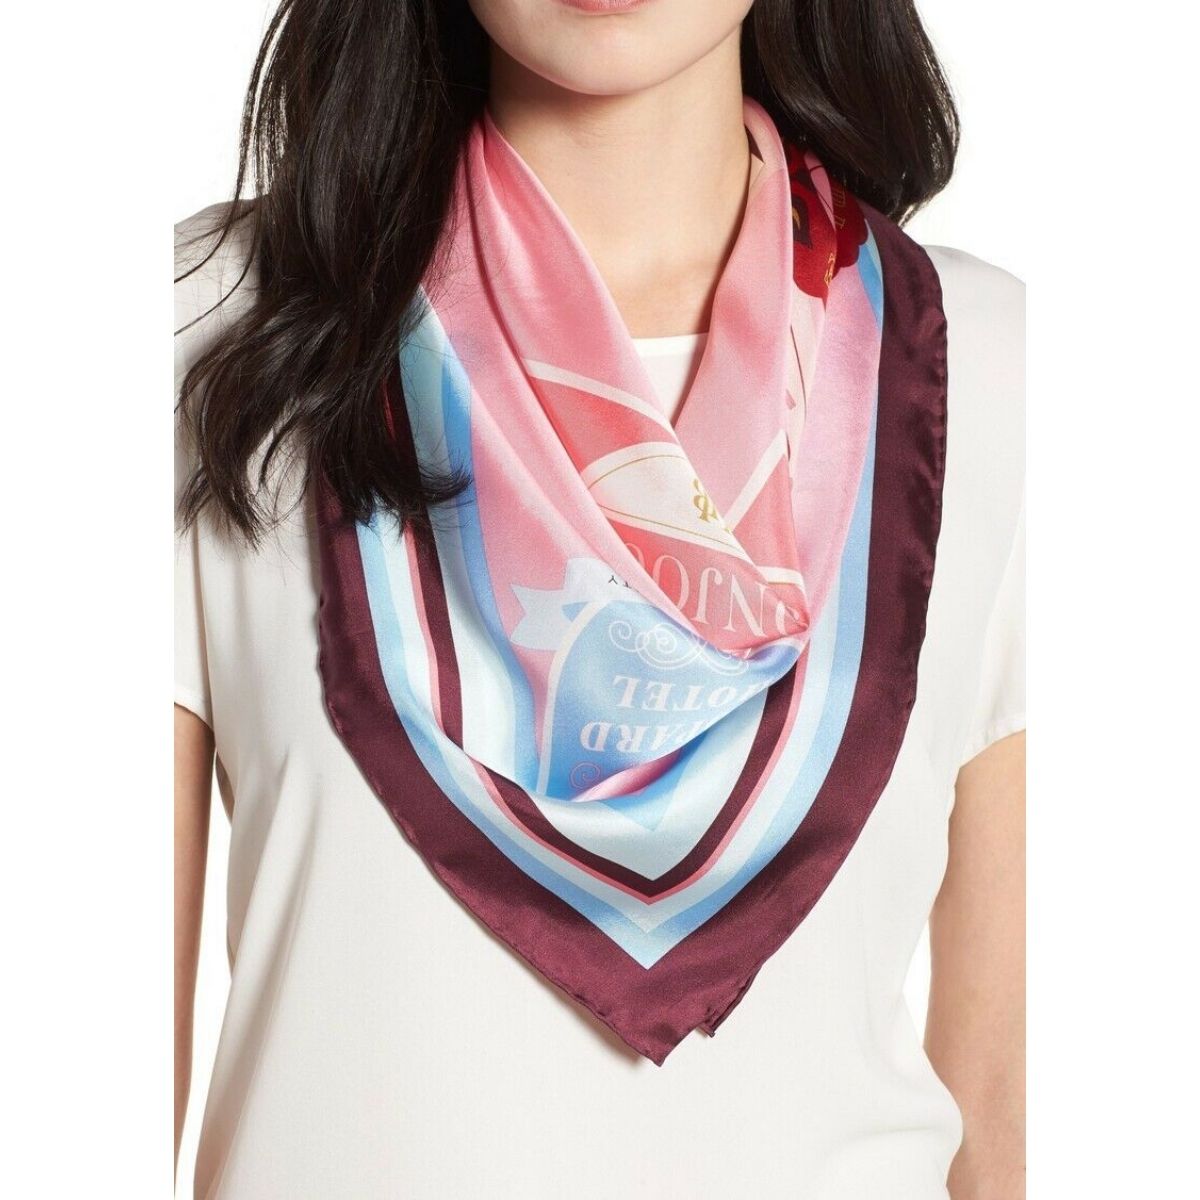 The Other Side Thrift Boutique - Kate Spade World Map Scarf $10 #katespade